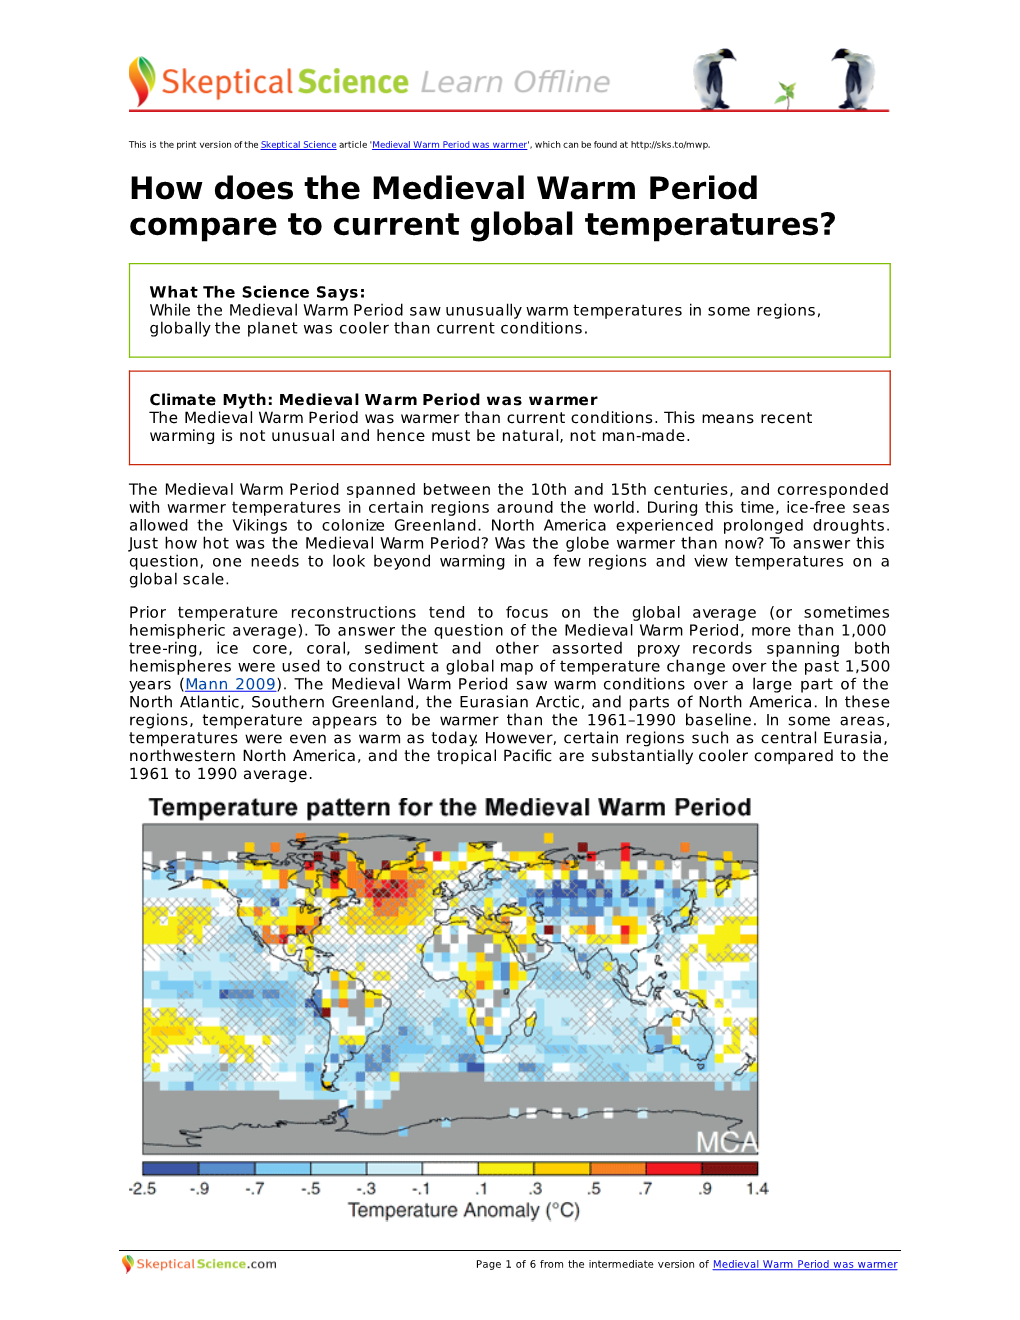 How Does the Medieval Warm Period Compare to Current Global Temperatures?